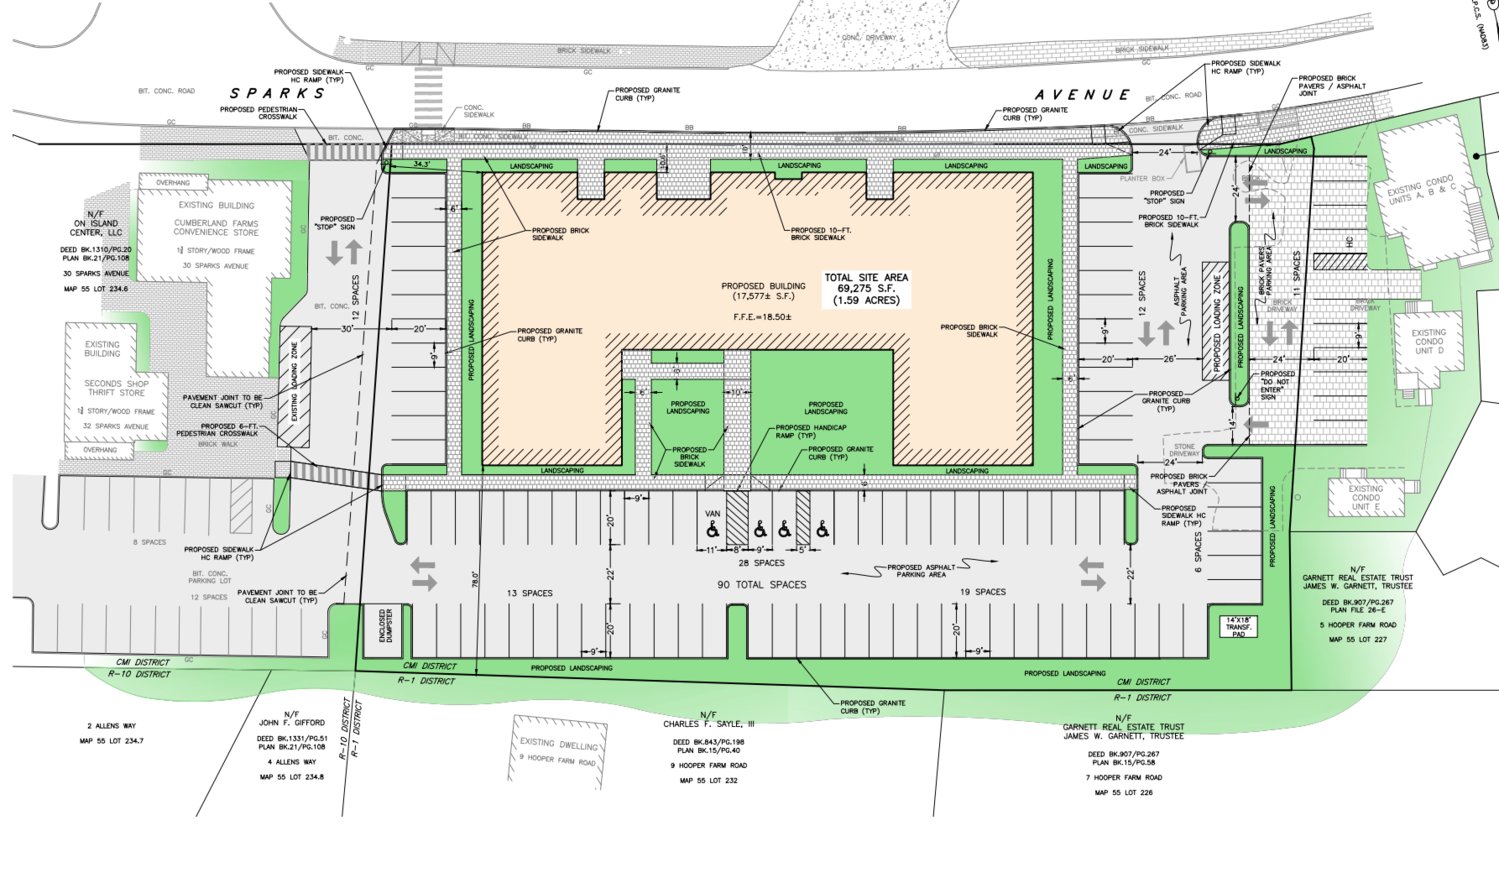 The most recent plan for the string of properties along Sparks Avenue across from the Stop & Shop calls for a single building stretching 60 feet along the street.